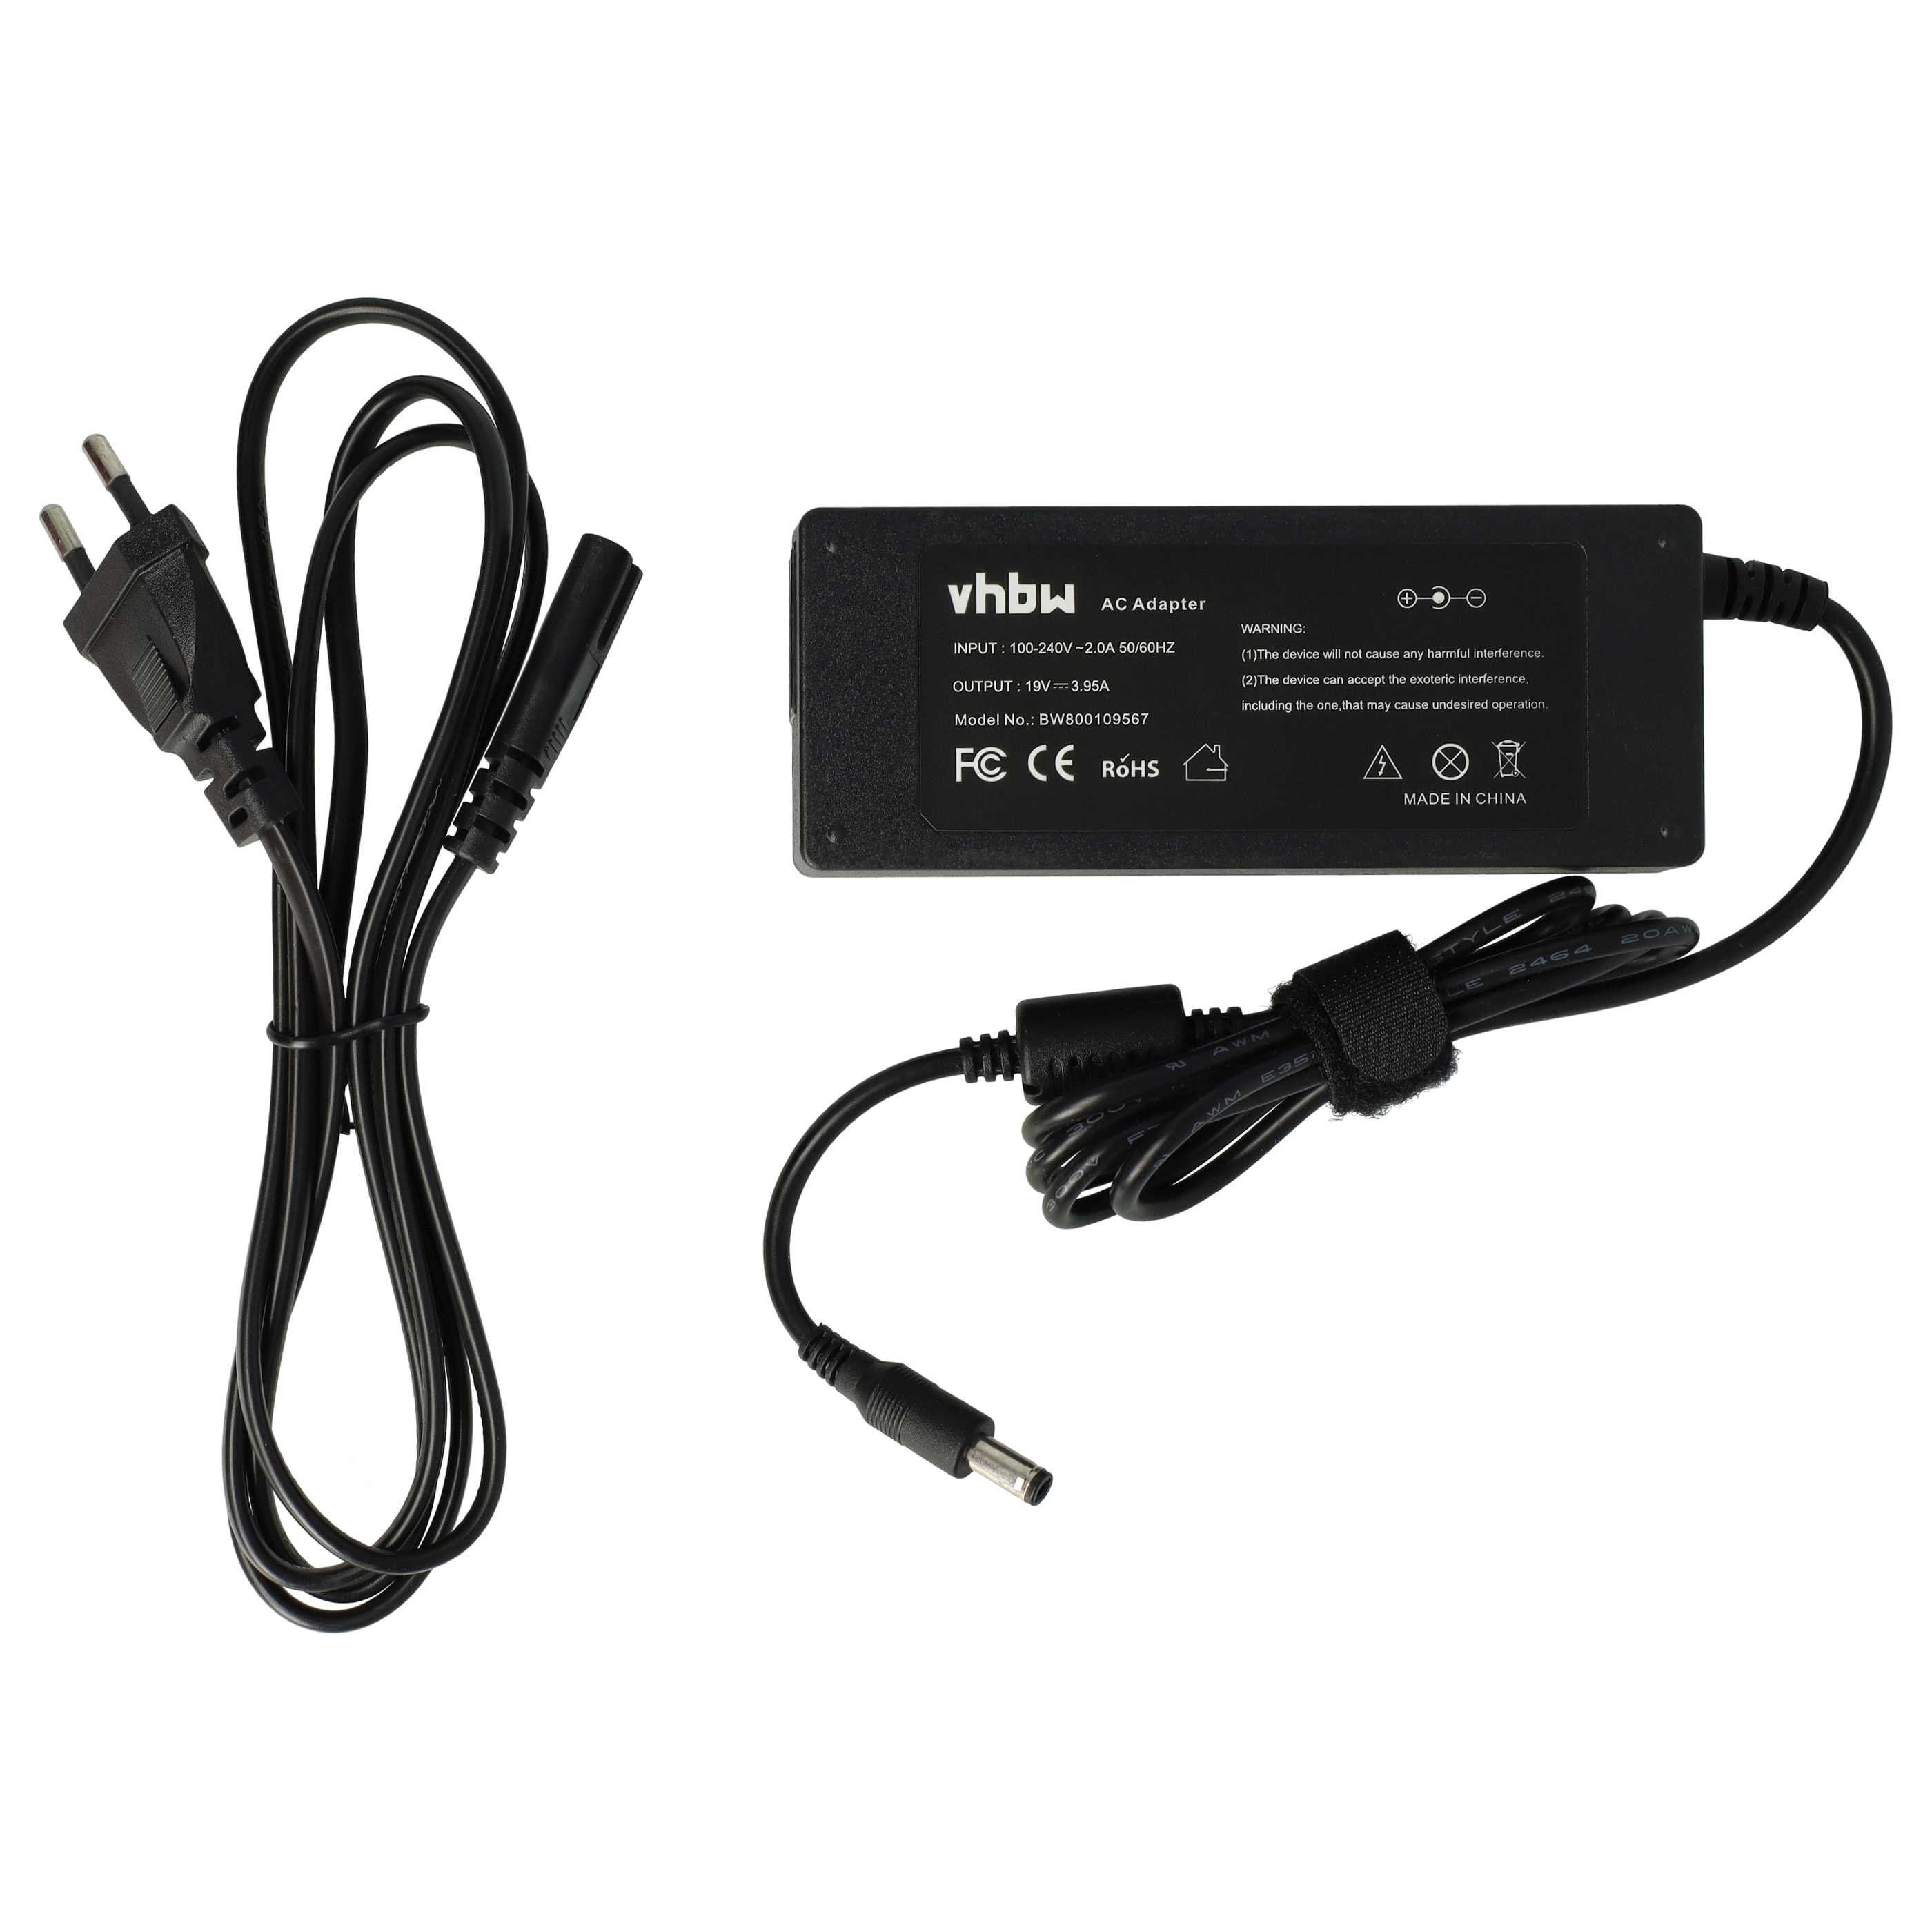 Mains Power Adapter replaces Acer PA-1900-05QA, AP.A1003.003 forNotebook, 75 W